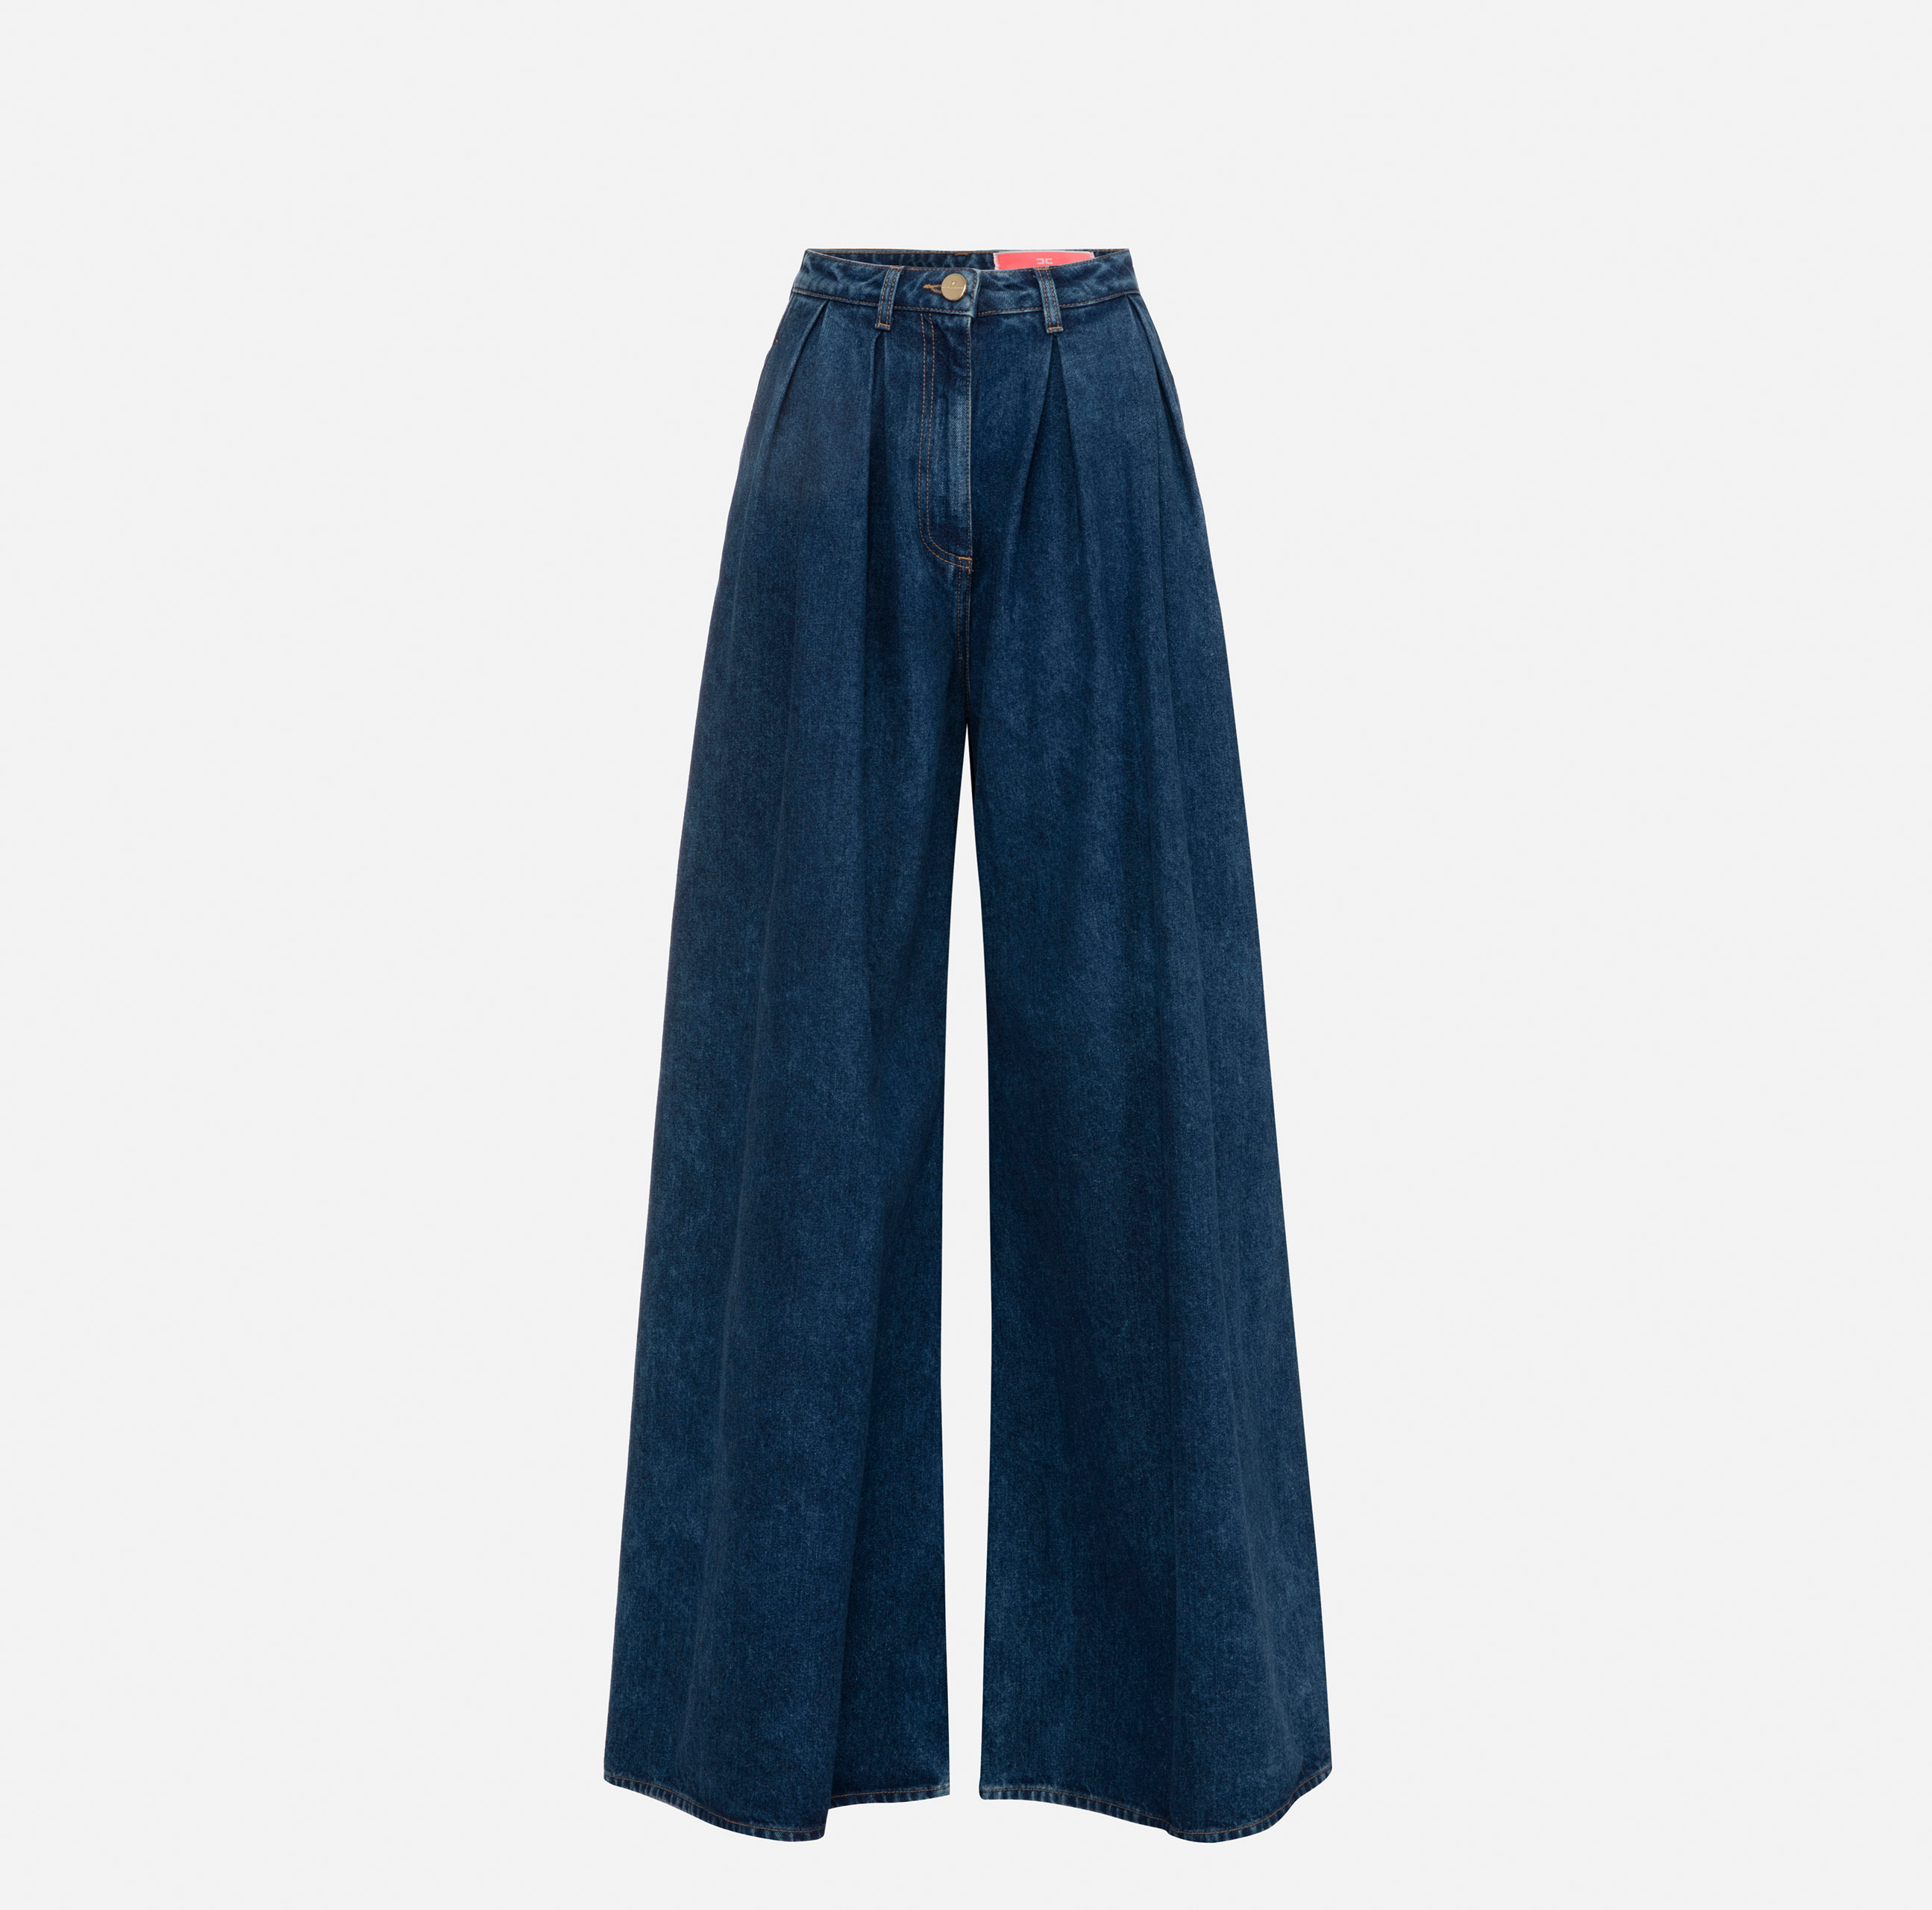 Jeans with darts and skirt effect - ABBIGLIAMENTO - Elisabetta Franchi